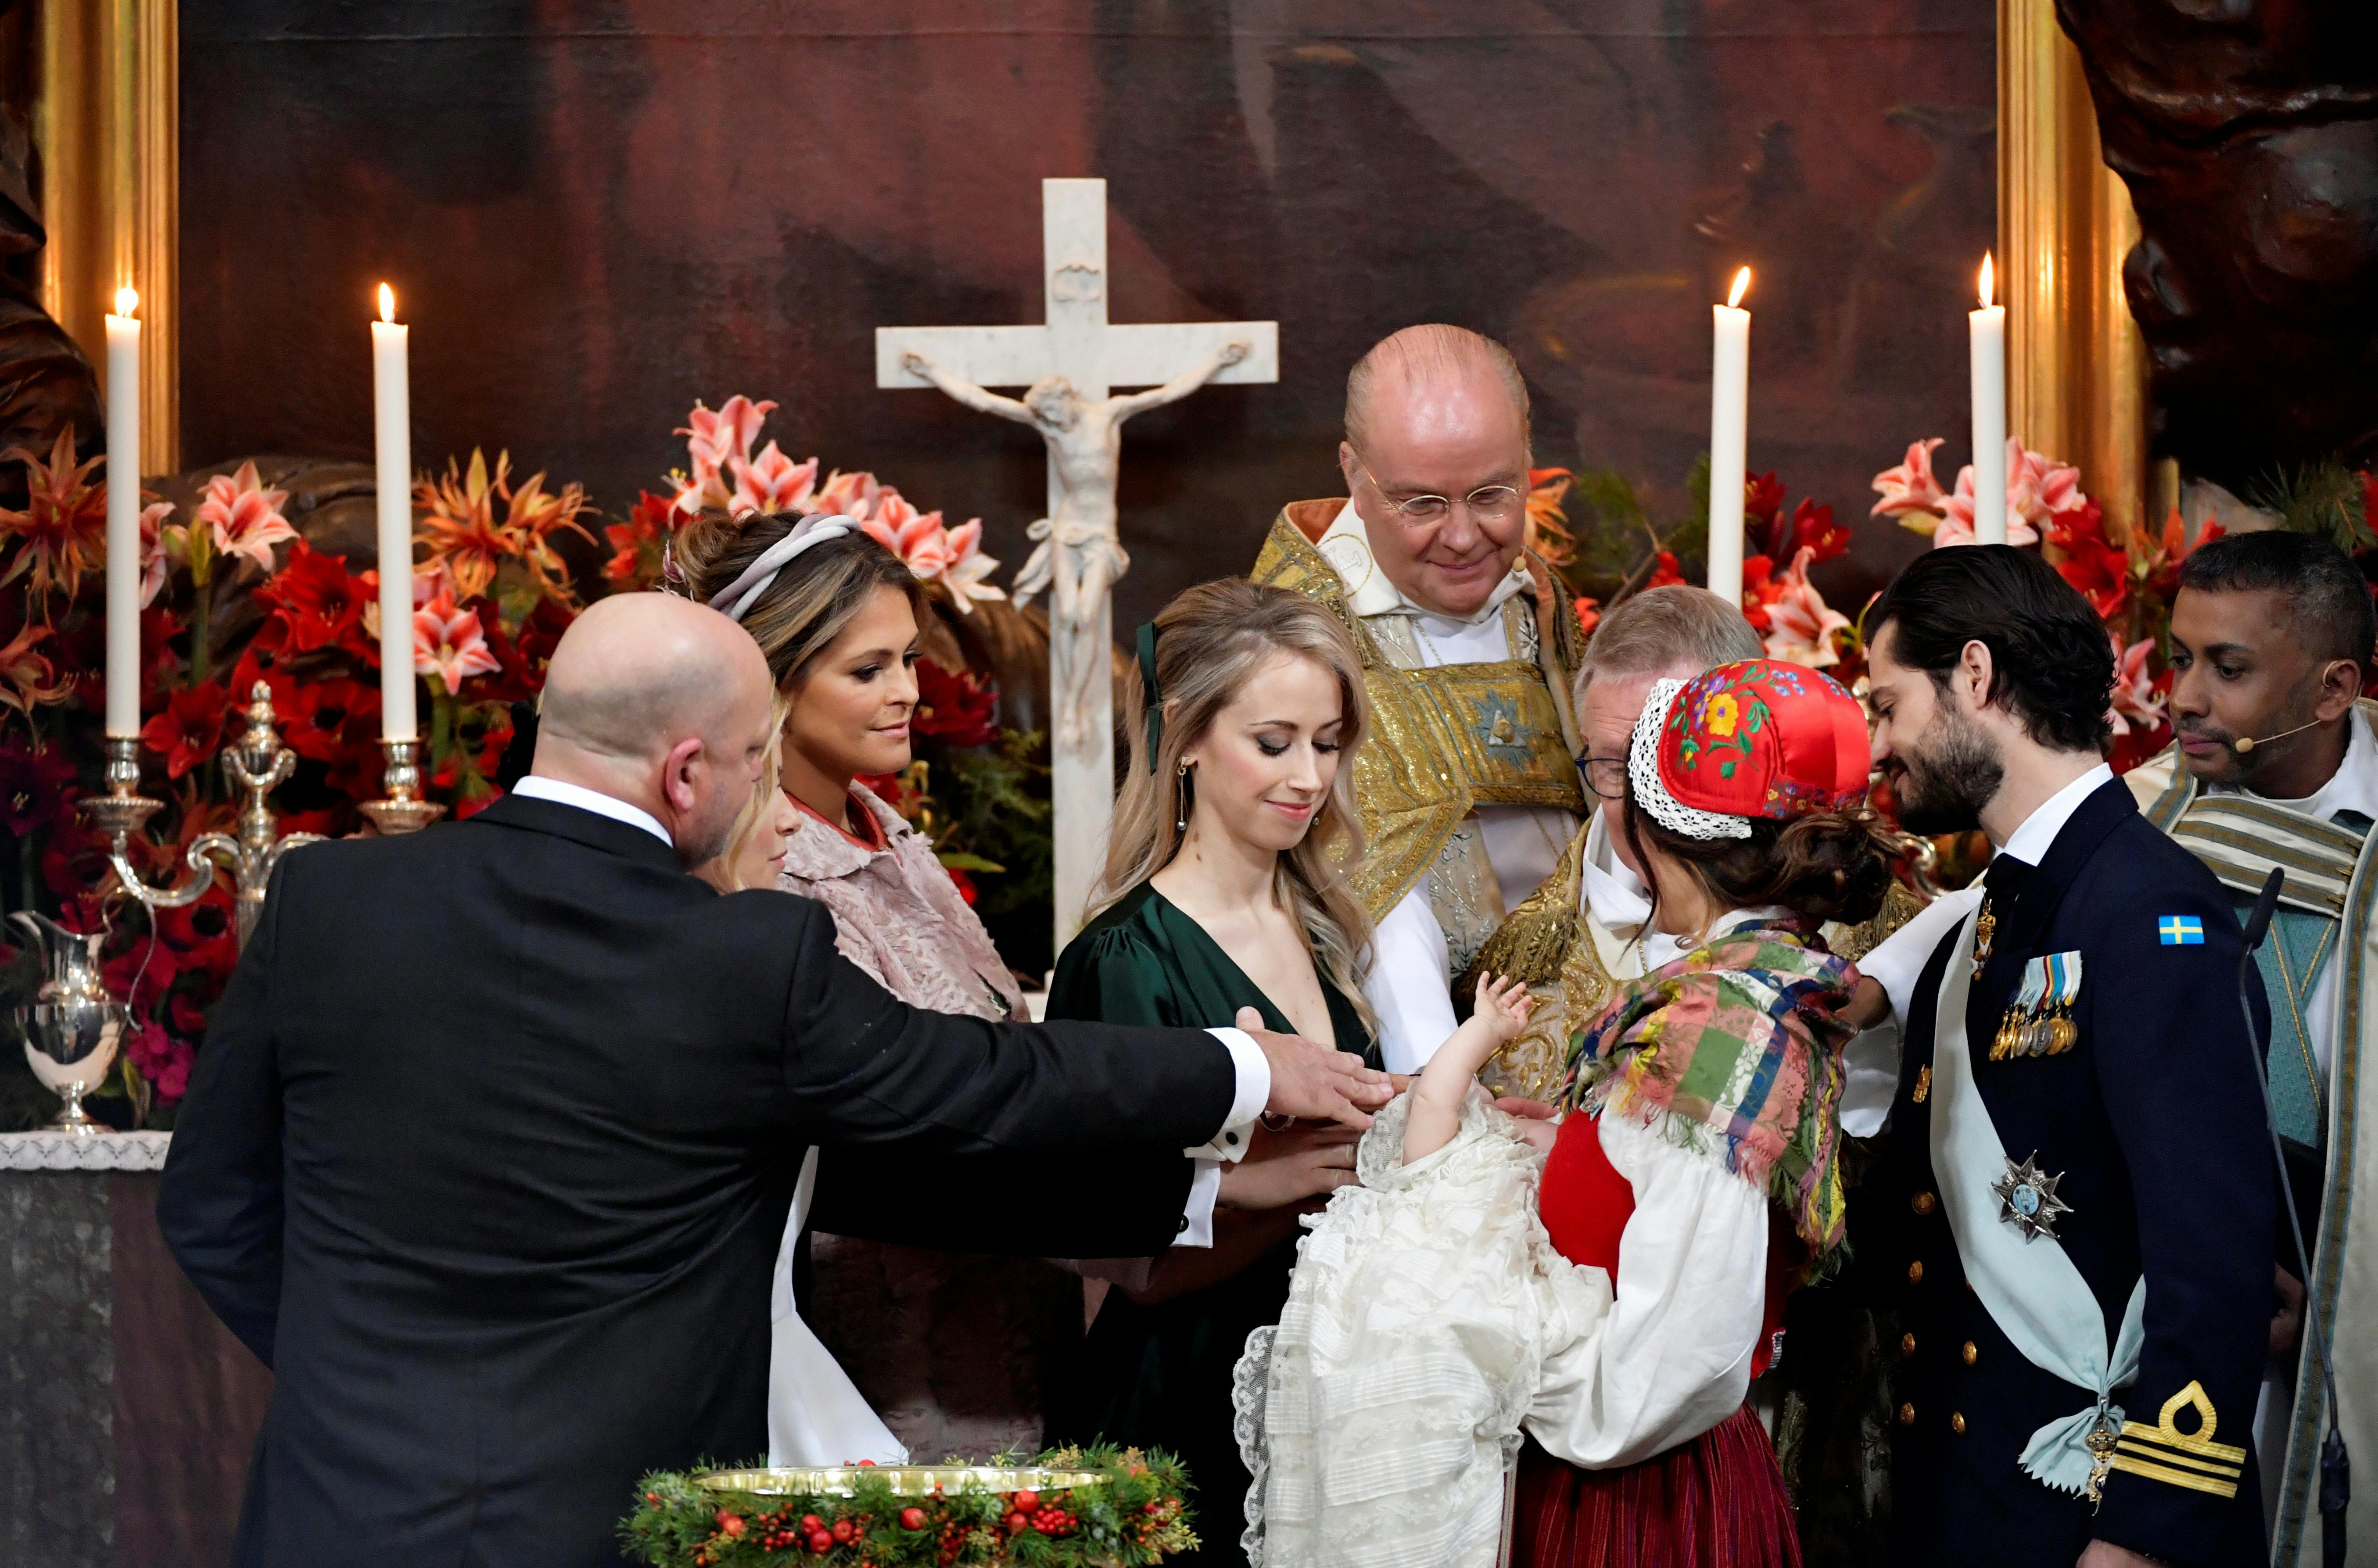 Thomas de Toledo Sommerlath, princess Madeleine of Sweden, Sara Hellqvist, bishop Johan Dalman, archbishop Anders Wejryd, prince Gabriel, princess Sofia, prince Carl Philip and court chaplain Michael Bjerkhagen during prince Gabriel christening in Drottningholm Palace Chapel outside Stockholm, Sweden December 1, 2017. TT News Agency/Anders Wiklund via REUTERS ATTENTION EDITORS - THIS IMAGE WAS PROVIDED BY A THIRD PARTY. SWEDEN OUT.NO COMMERCIAL OR EDITORIAL SALES IN SWEDEN.